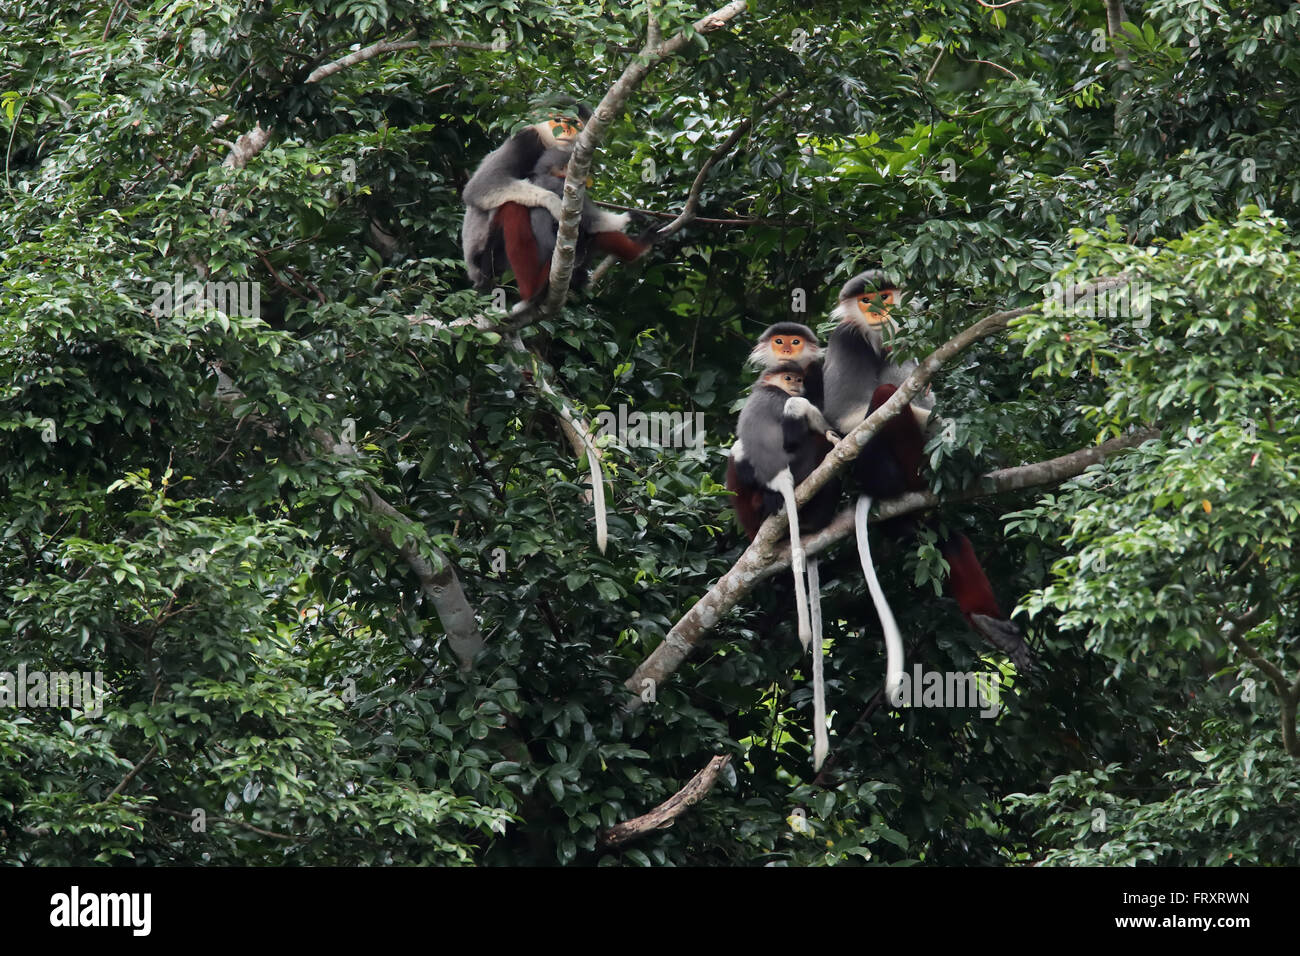 A Red-shanked Douc Langur family, Vietnam and Laos endemic primate species Stock Photo